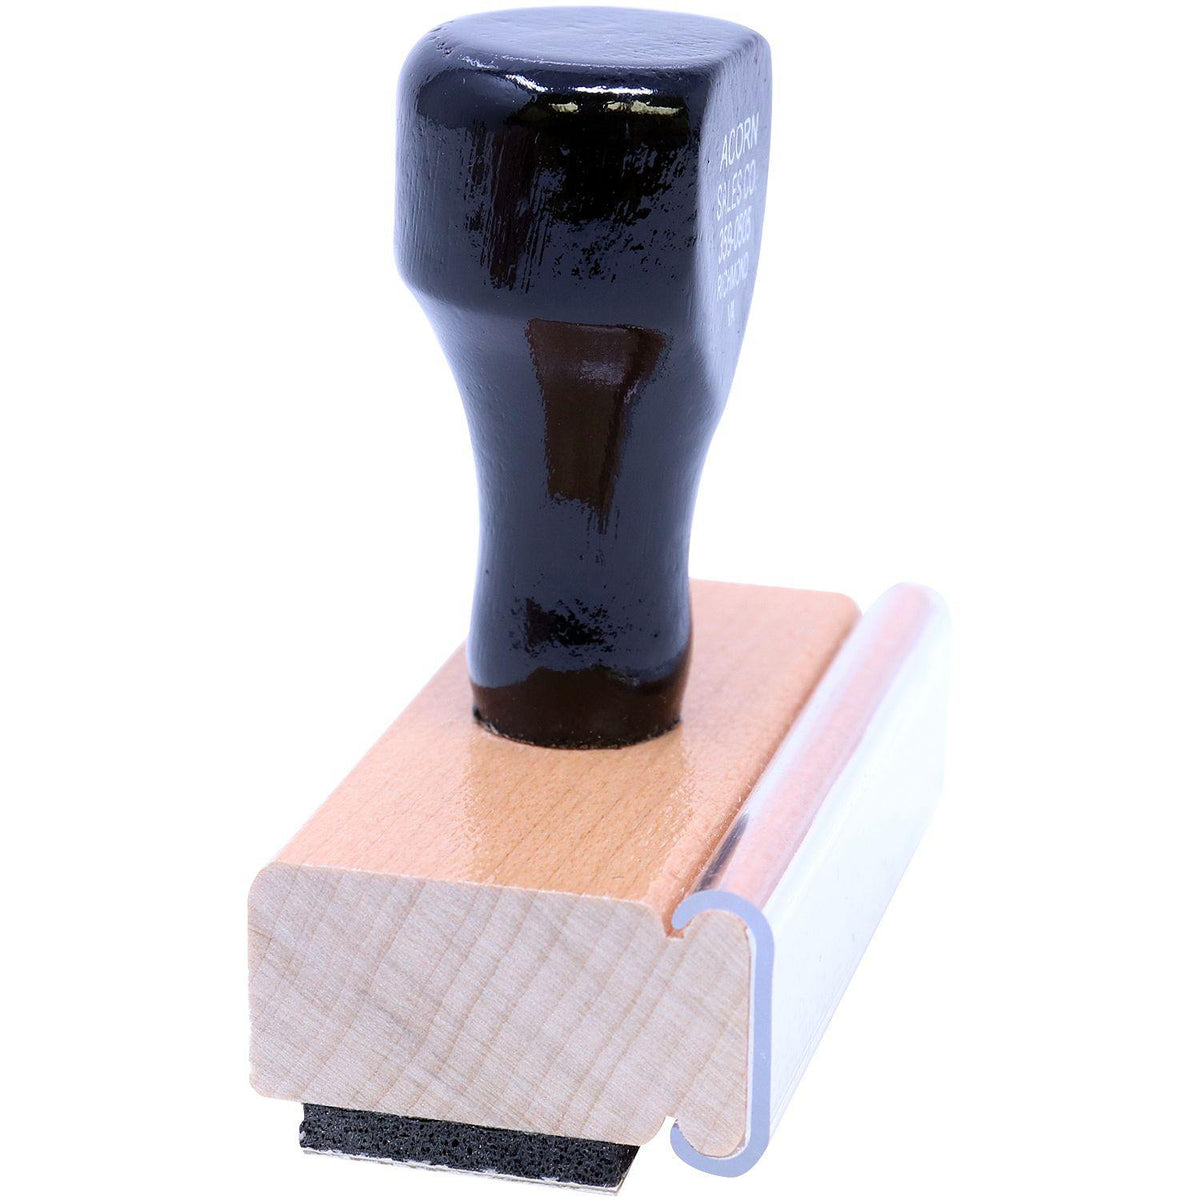 Side View of Super Homework Rubber Stamp at an Angle